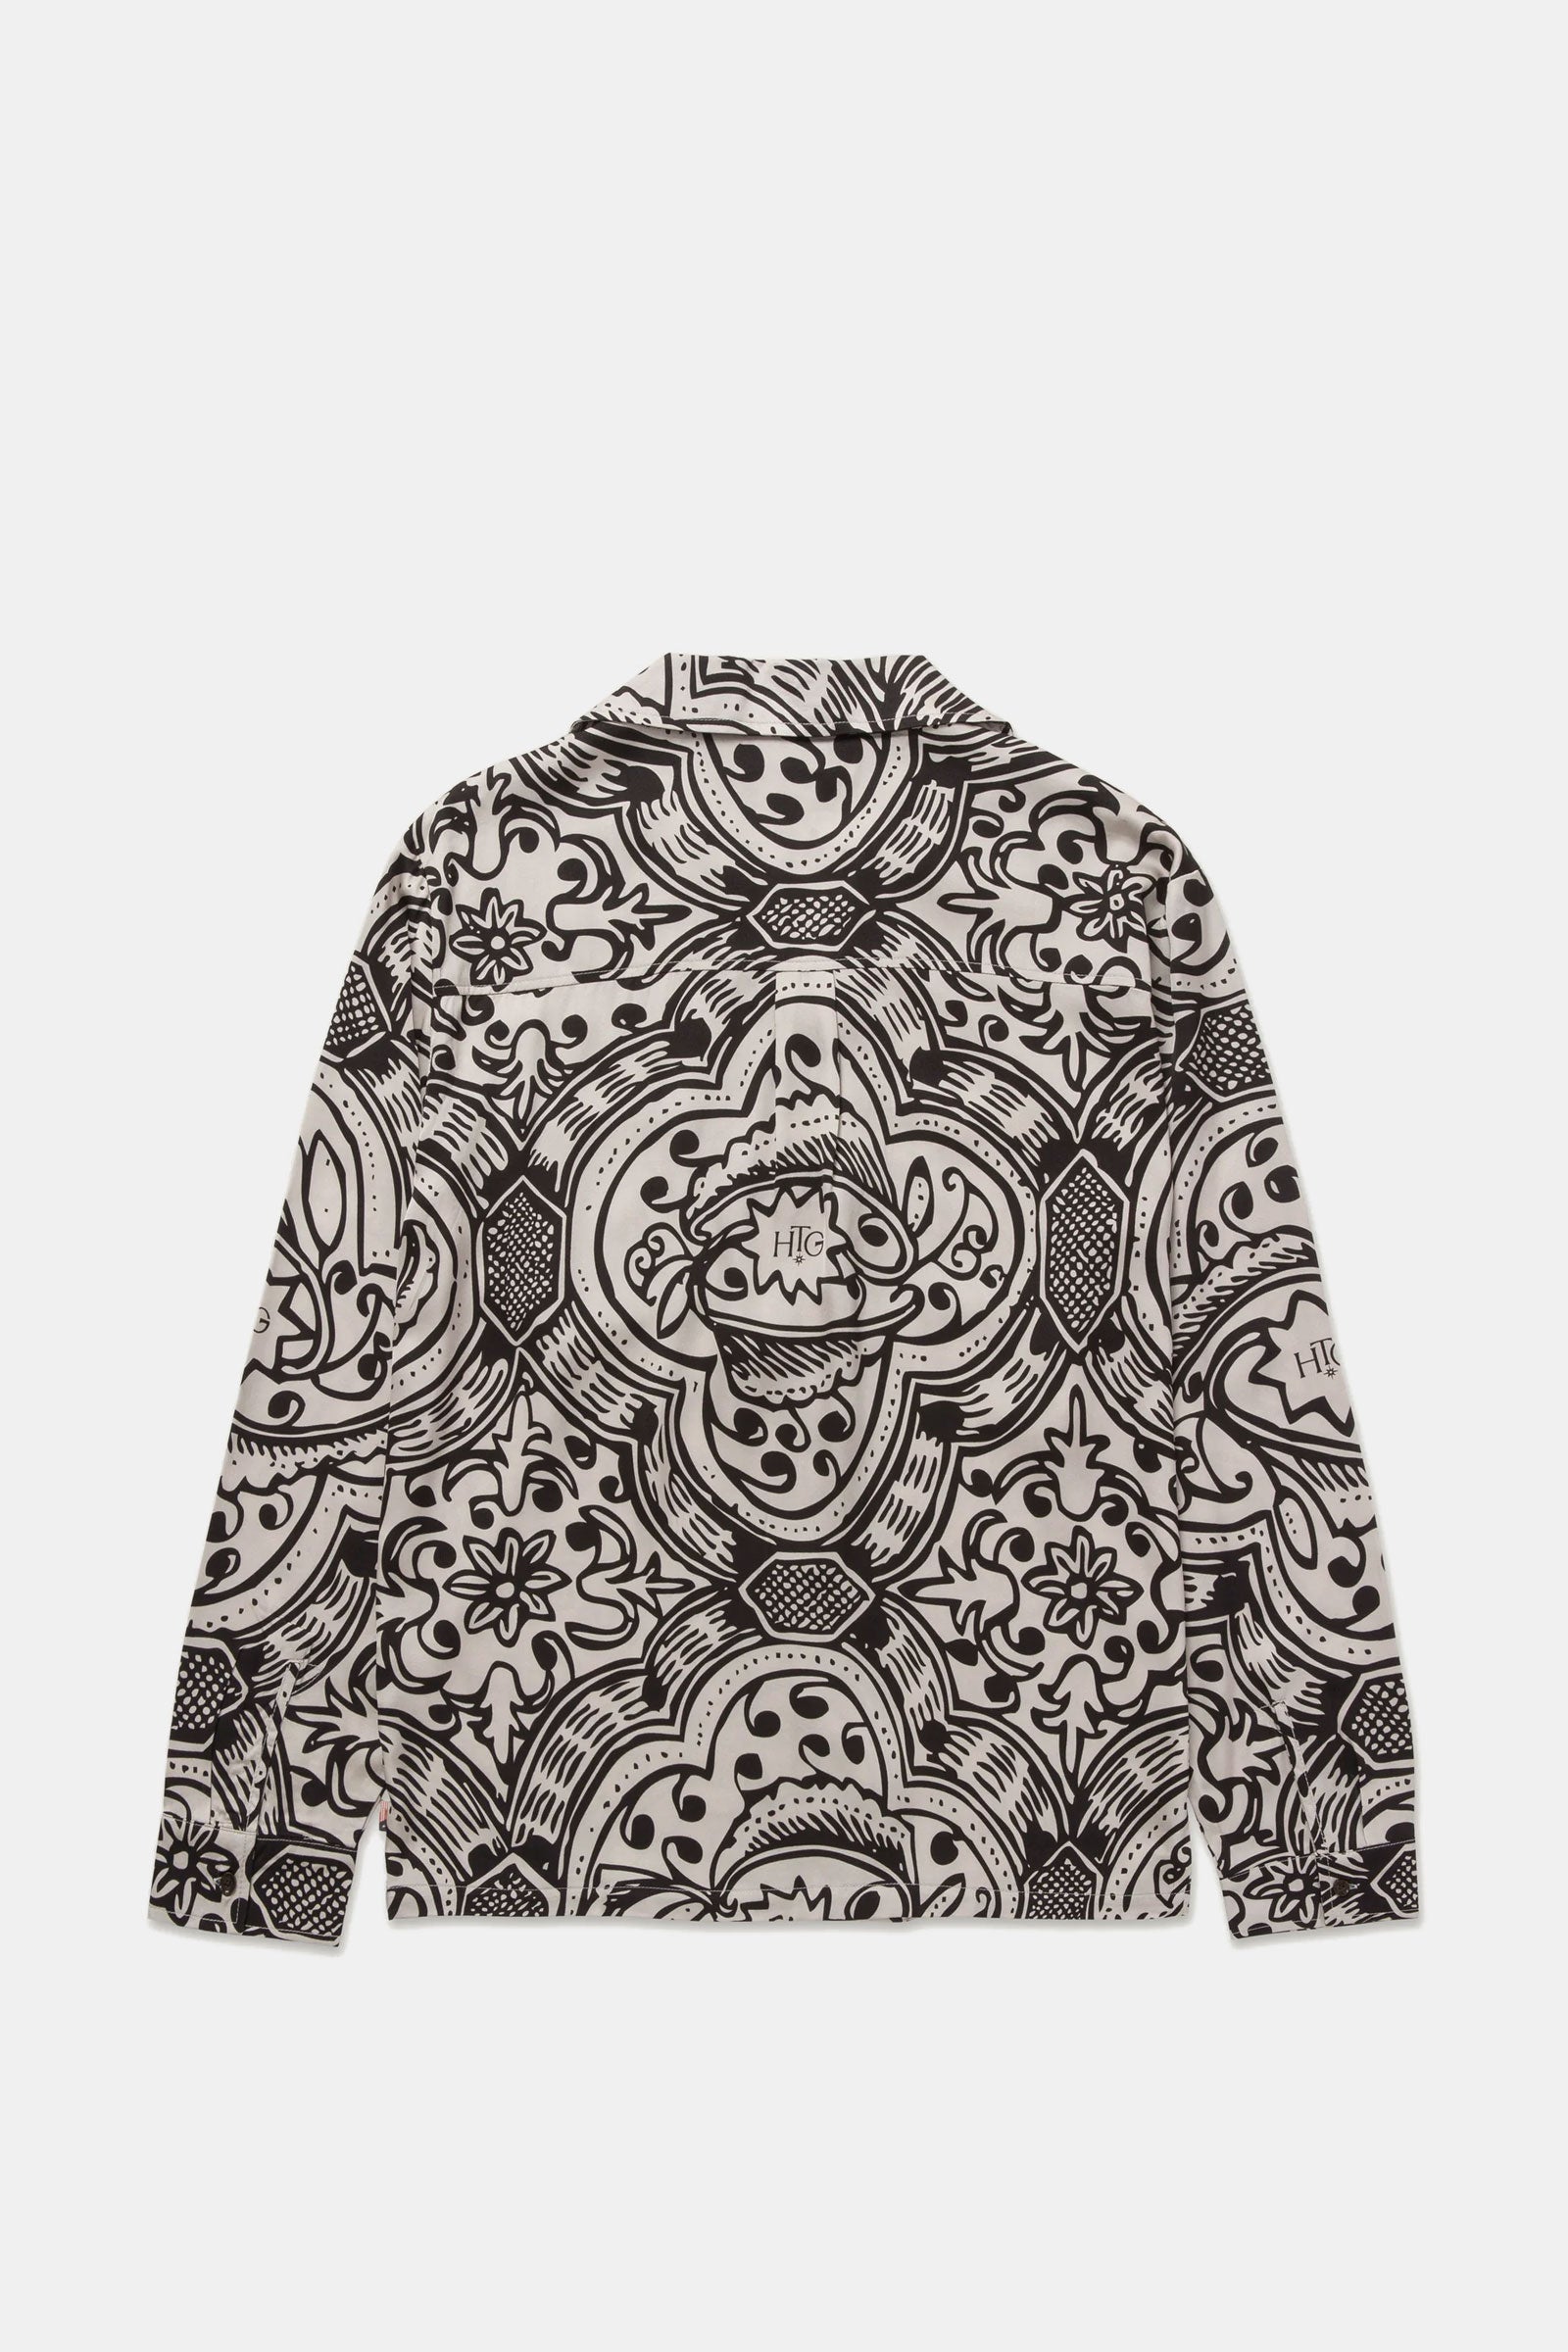 Long Sleeve Printed Woven Button Up